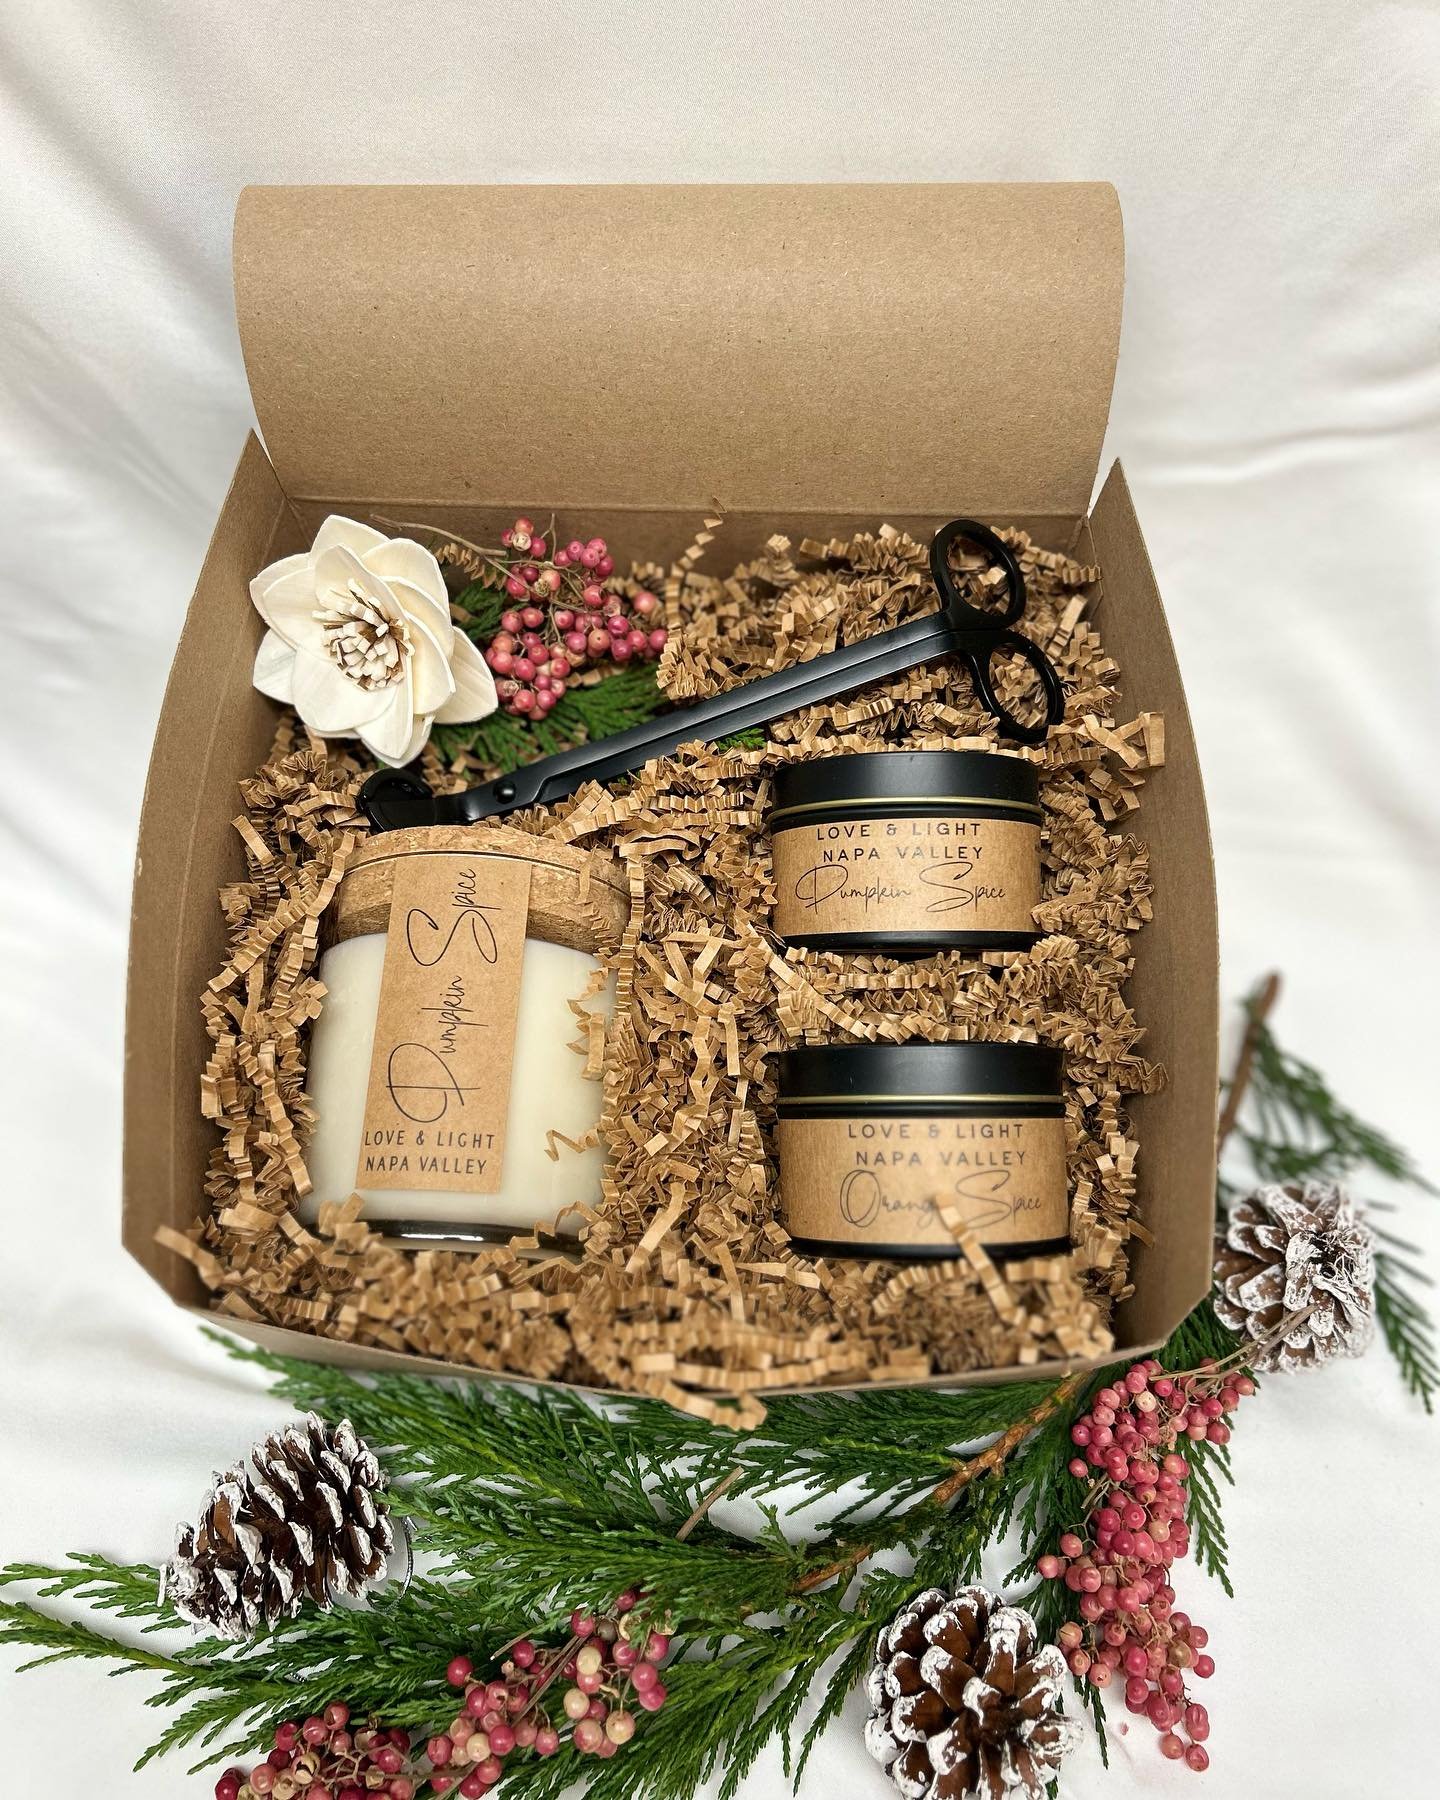 The holidays are just around the corner. In collaboration with Jefferies General we are putting together gift boxes. We have a variety of choices, you can pick style and scent of candles and add ornaments, holiday dishes, matches, wick trimmer, honey